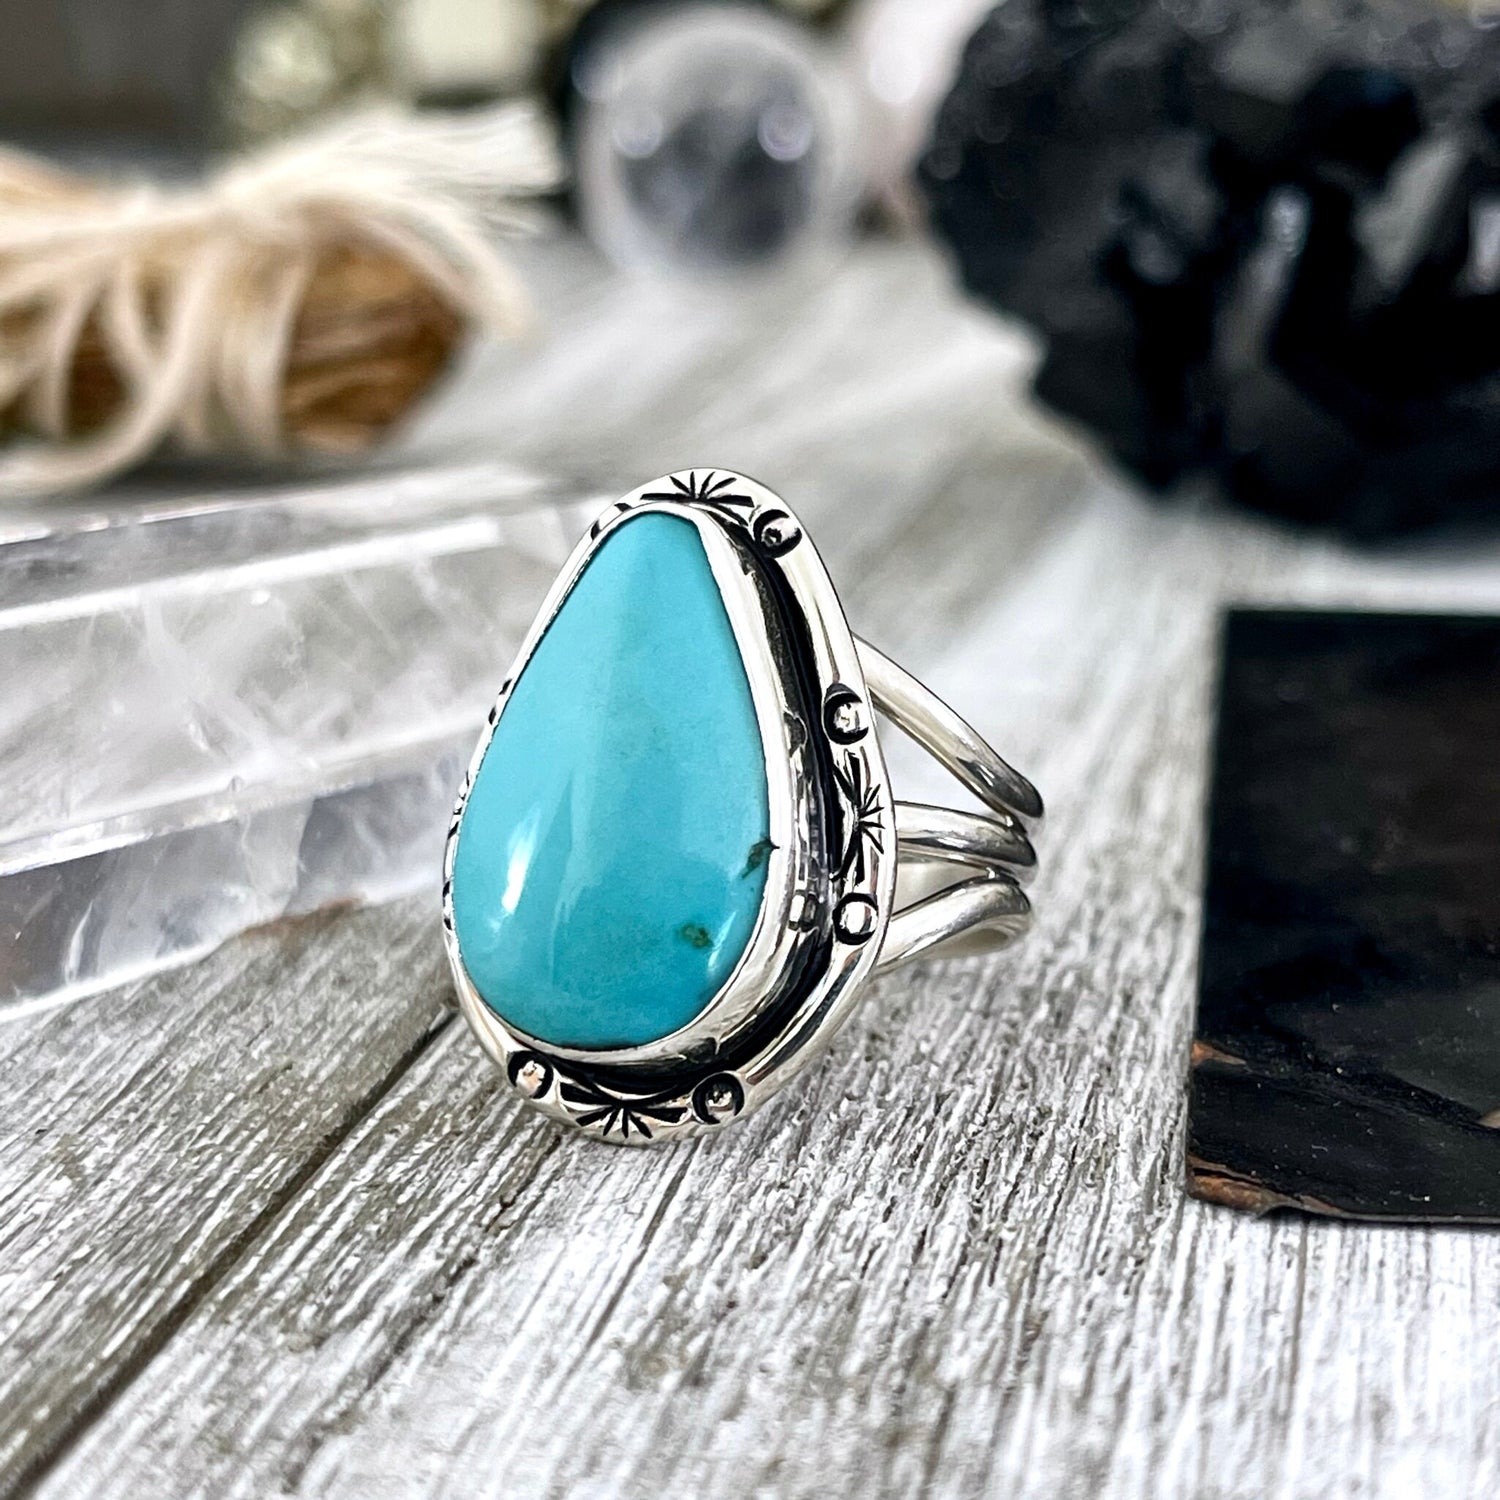 Size 9 Kingman Turquoise Statement Ring Set in Thick Sterling Silver / Curated by FOXLARK Collection